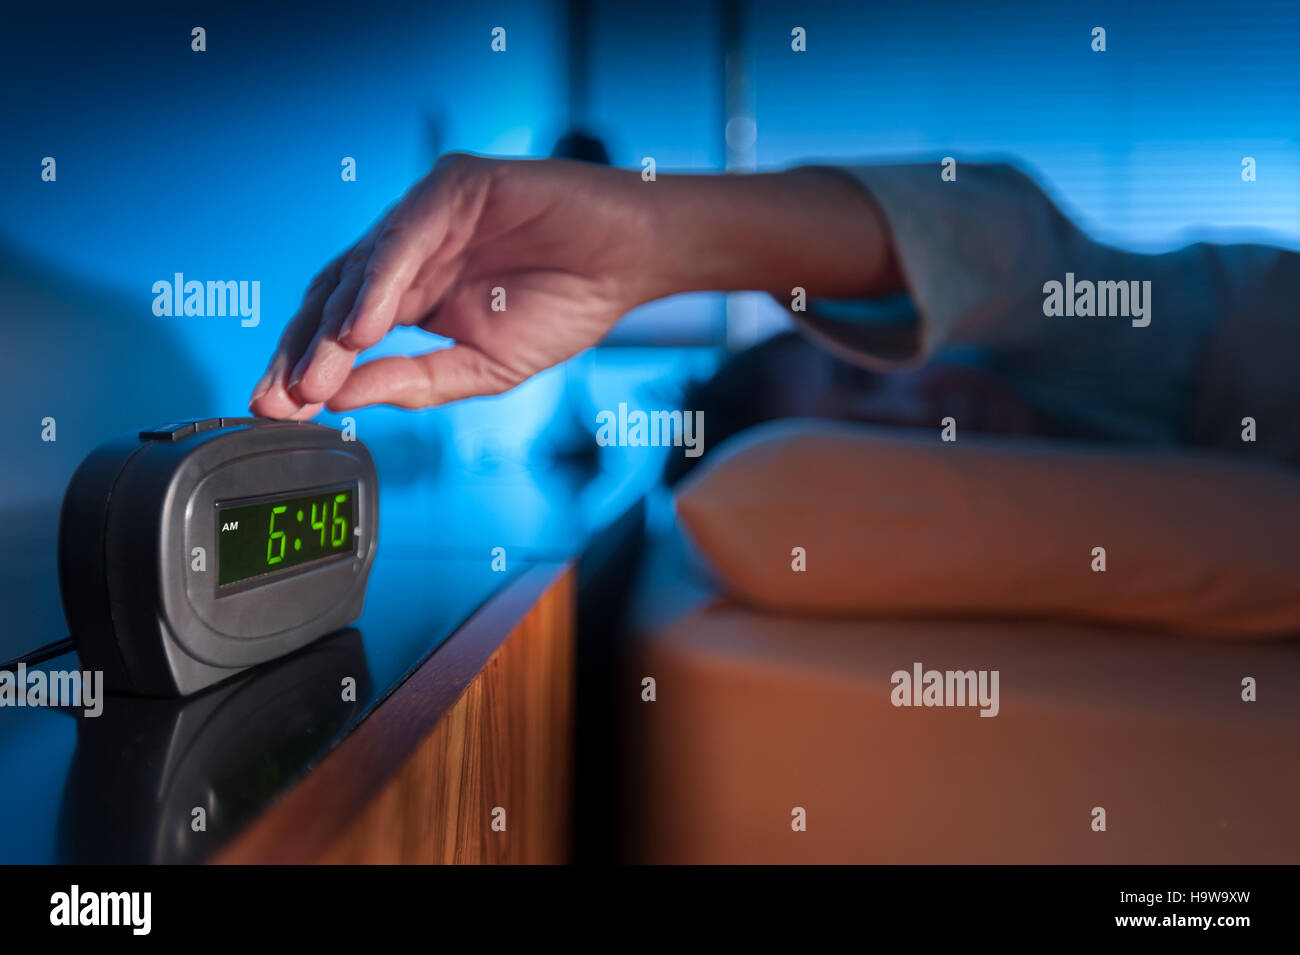 Woman pressing snooze button on early morning digital alarm clock Stock Photo